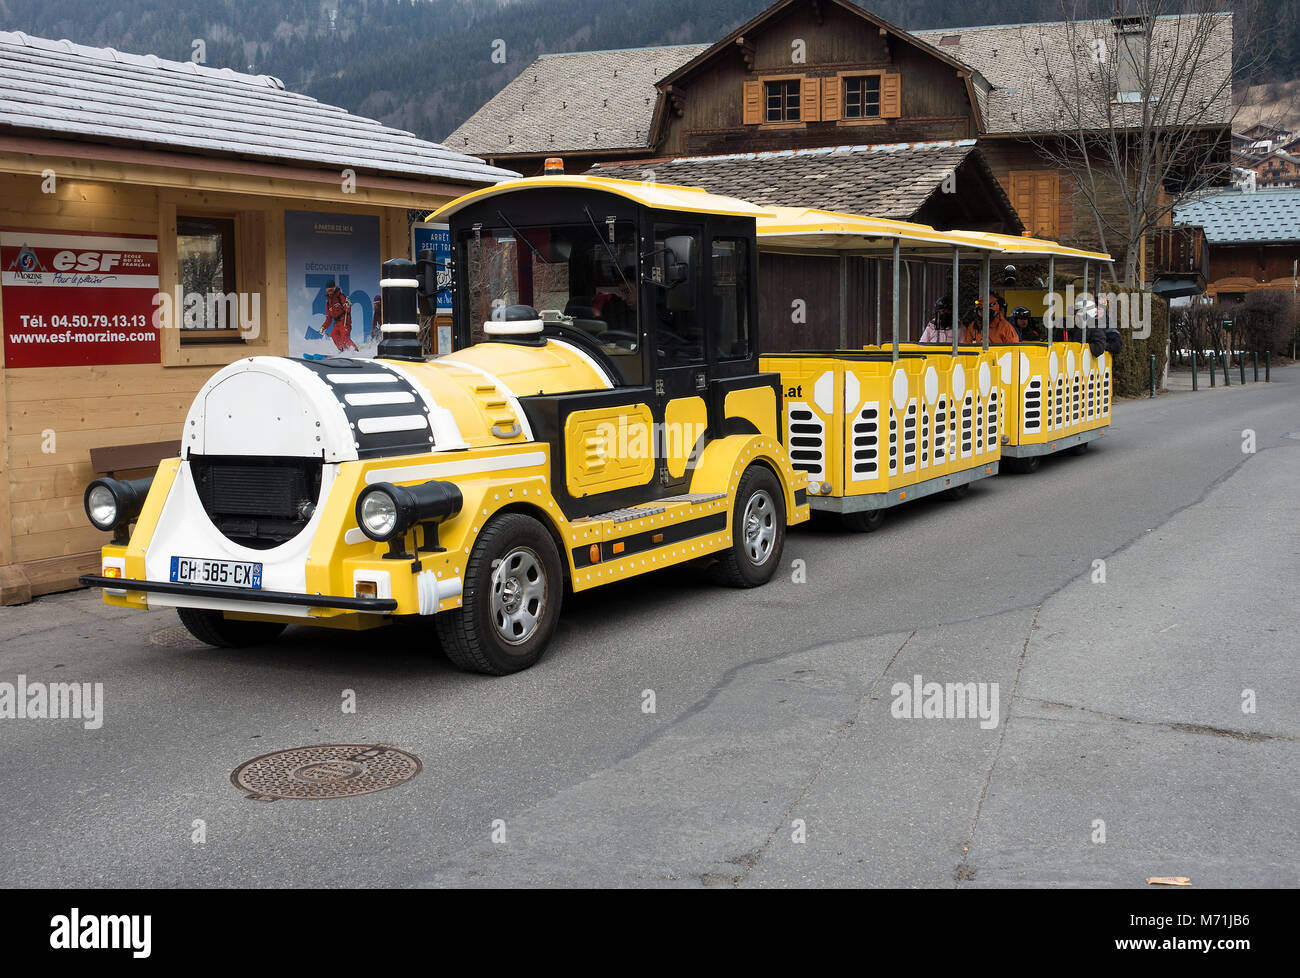 Complimentary Passenger Train Service for Transporting Skiers, Snowboarders and Hikers Around the Ski Resort of Morzine Haute Savoie France Stock Photo